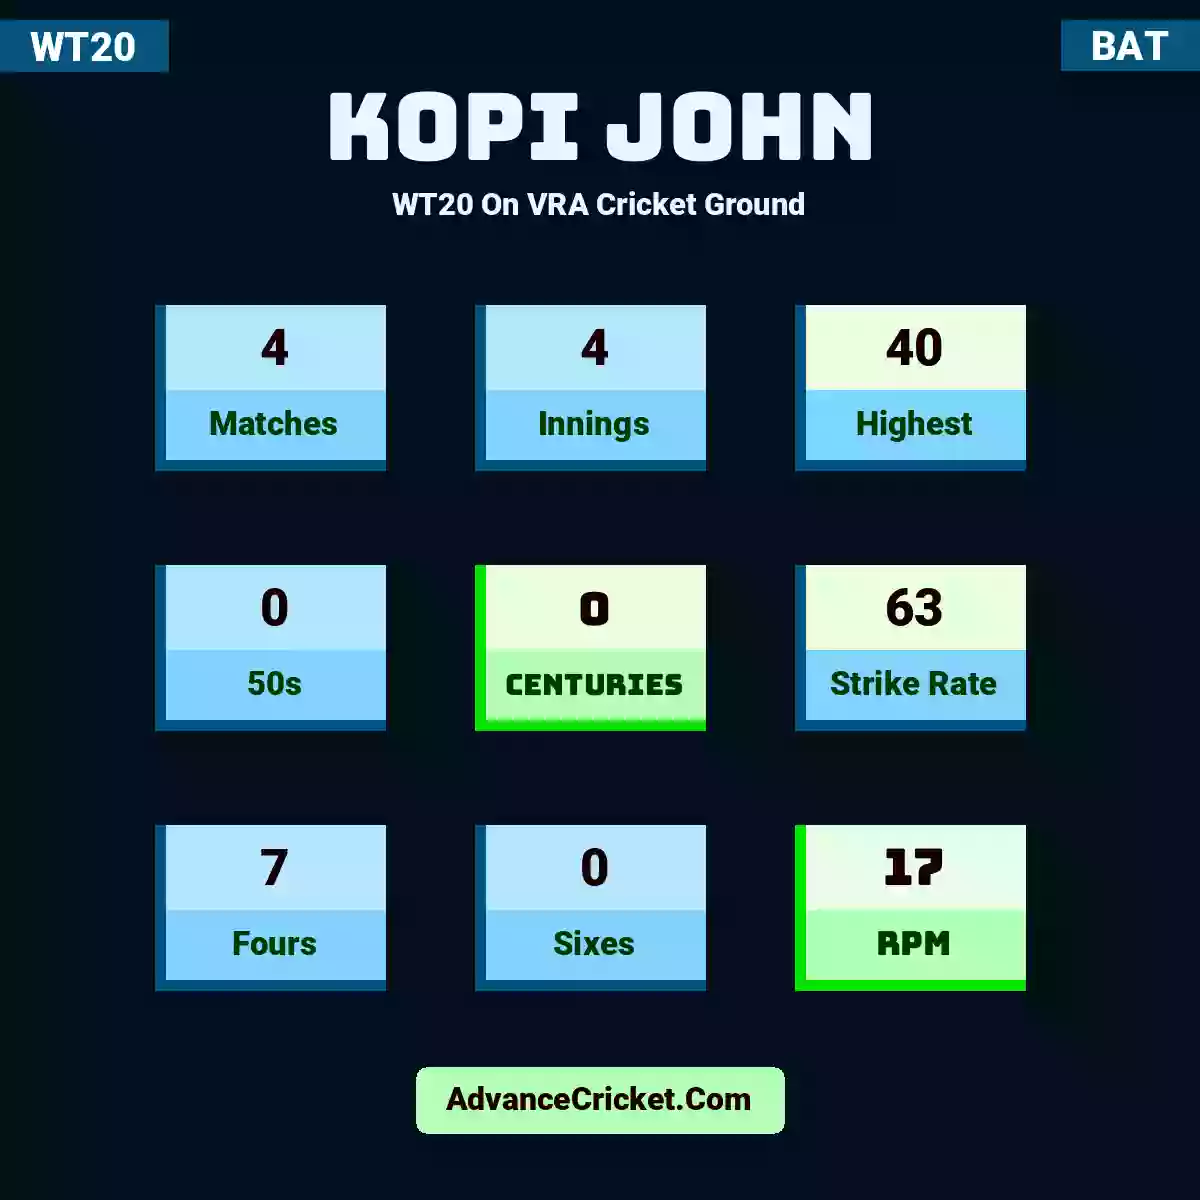 Kopi John WT20  On VRA Cricket Ground, Kopi John played 4 matches, scored 40 runs as highest, 0 half-centuries, and 0 centuries, with a strike rate of 63. K.John hit 7 fours and 0 sixes, with an RPM of 17.